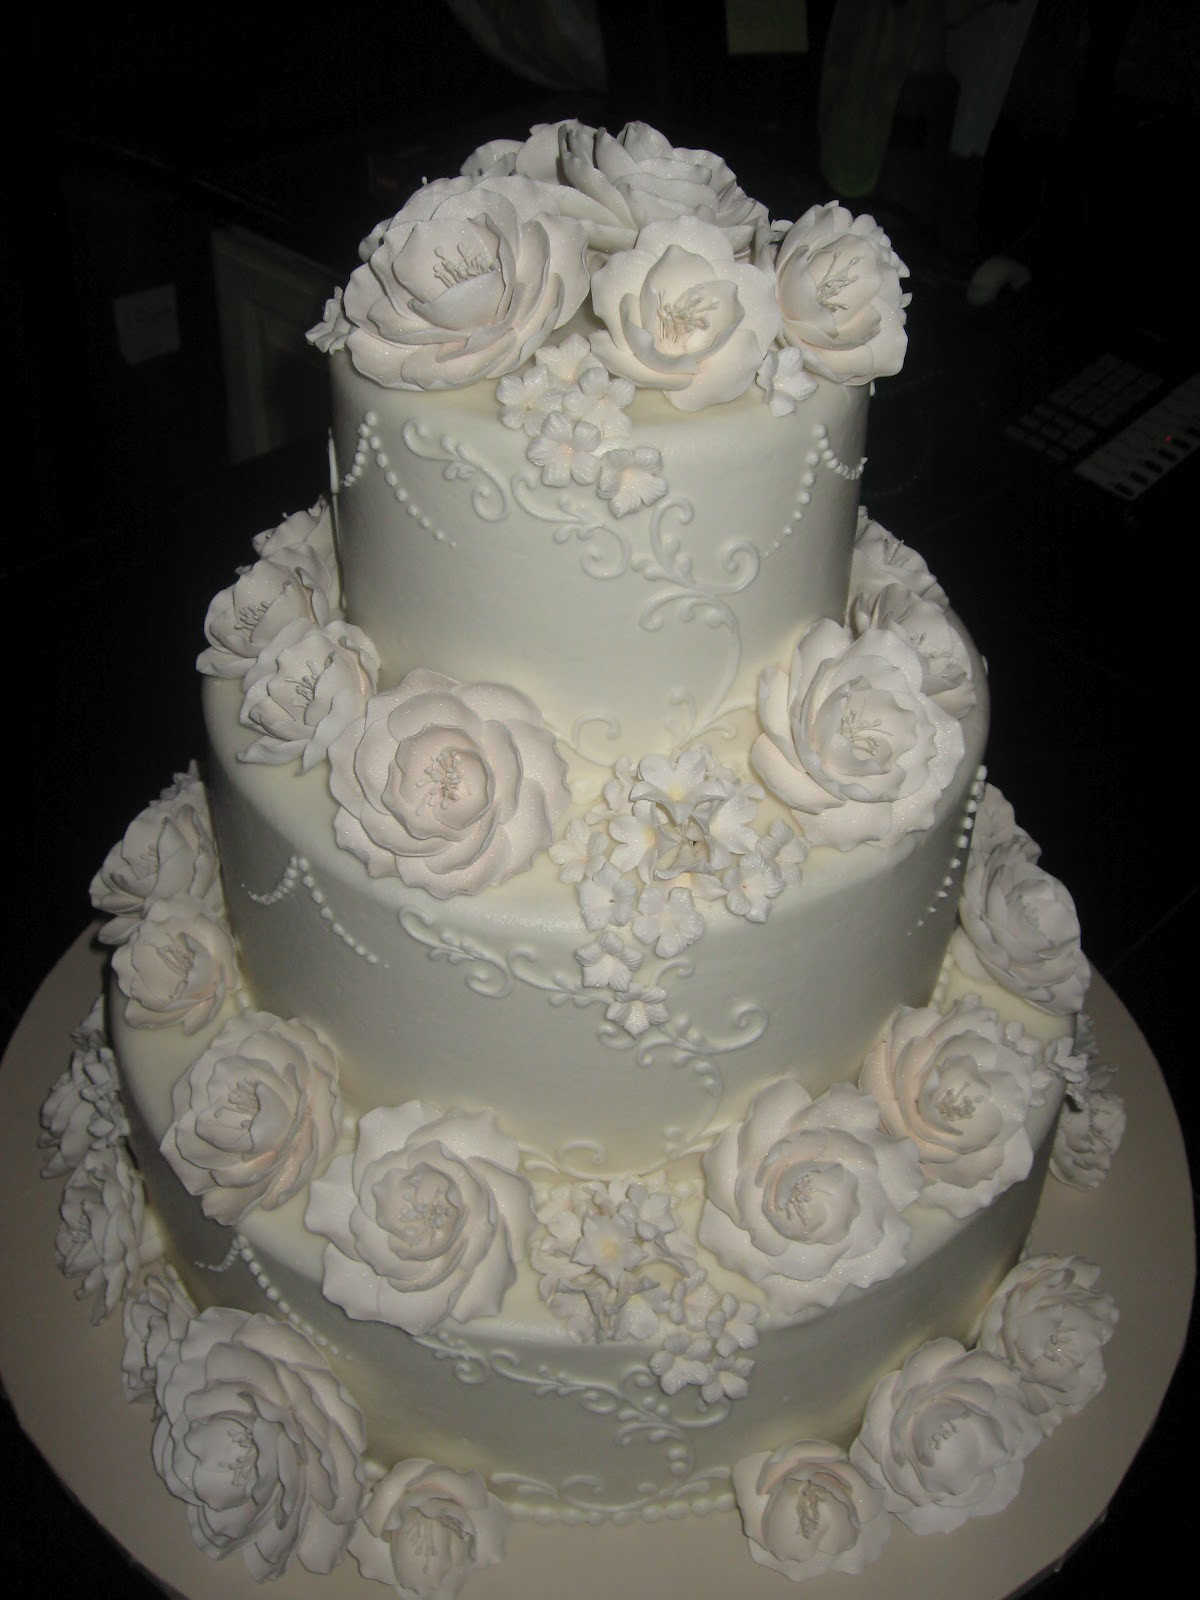 Summer Wedding Cakes
 "It s All About The Cake" Summer Wedding cakes